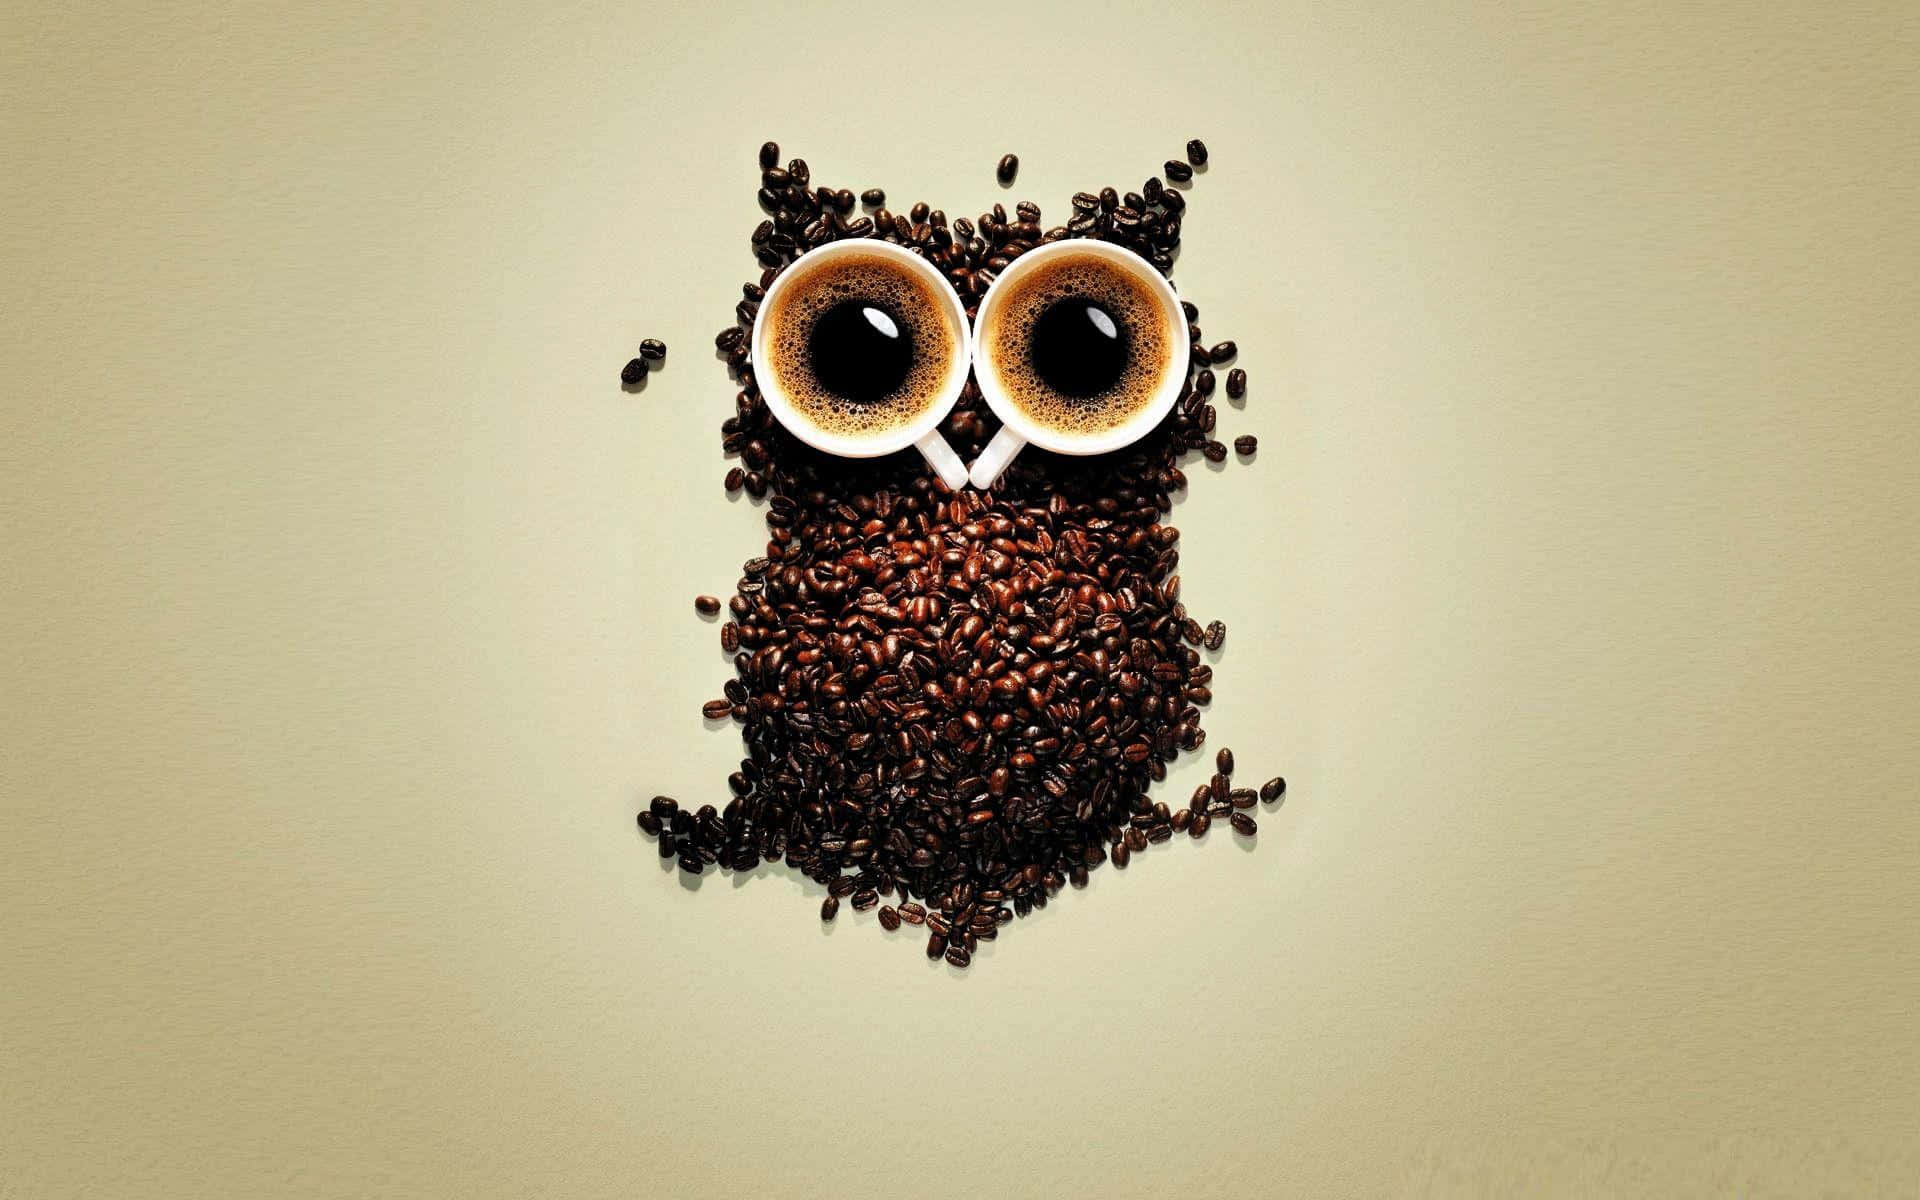 Funny Owl Art With Big Eyes Picture